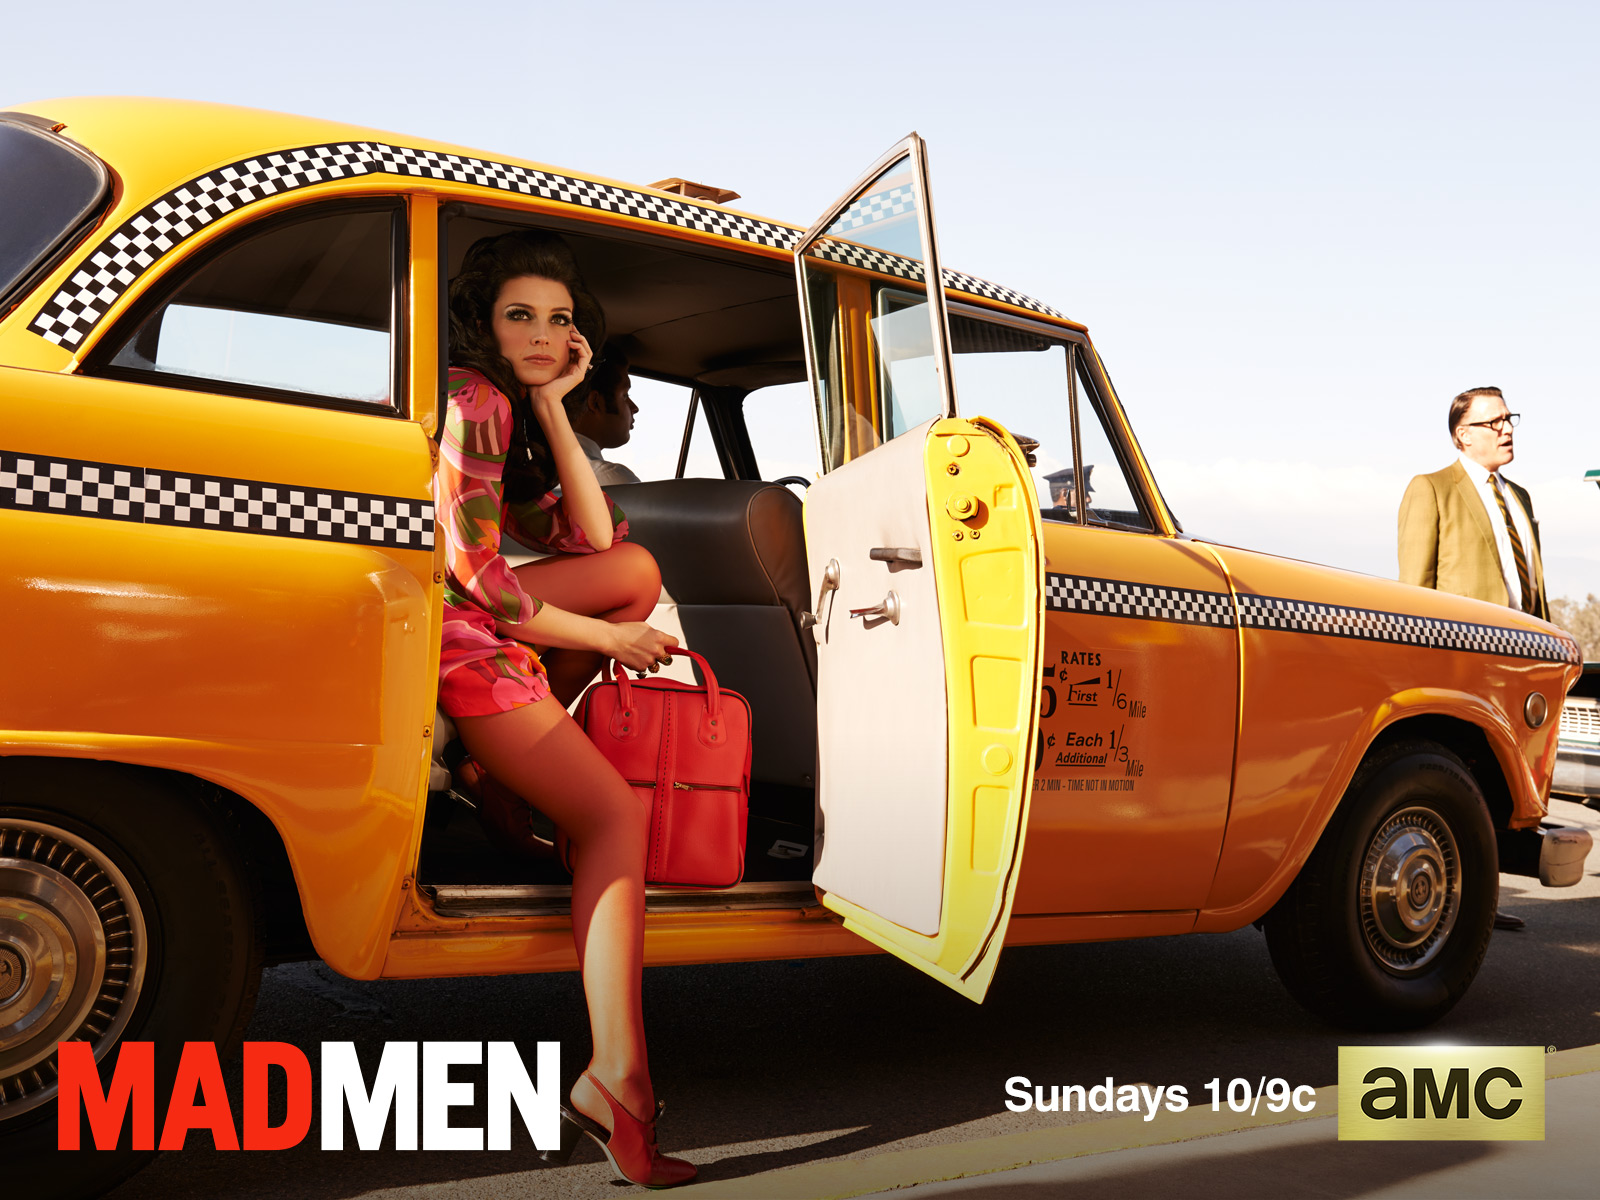 Cool Wallpapers tv show, mad men, taxi